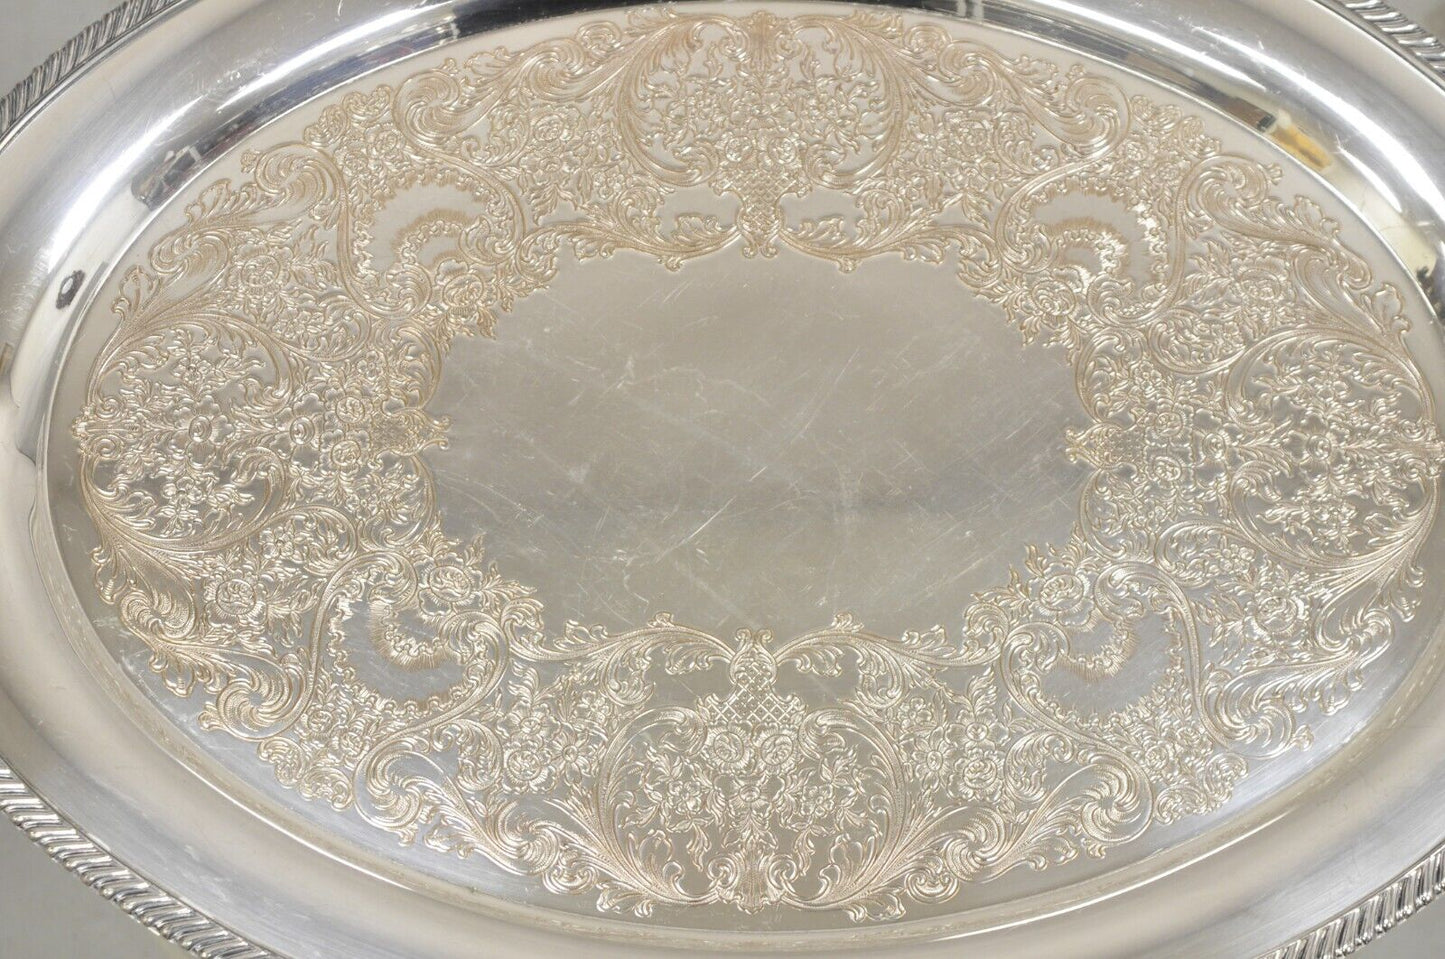 WM Rogers 4082 Silver Plated Victorian Oval Serving Platter Tray